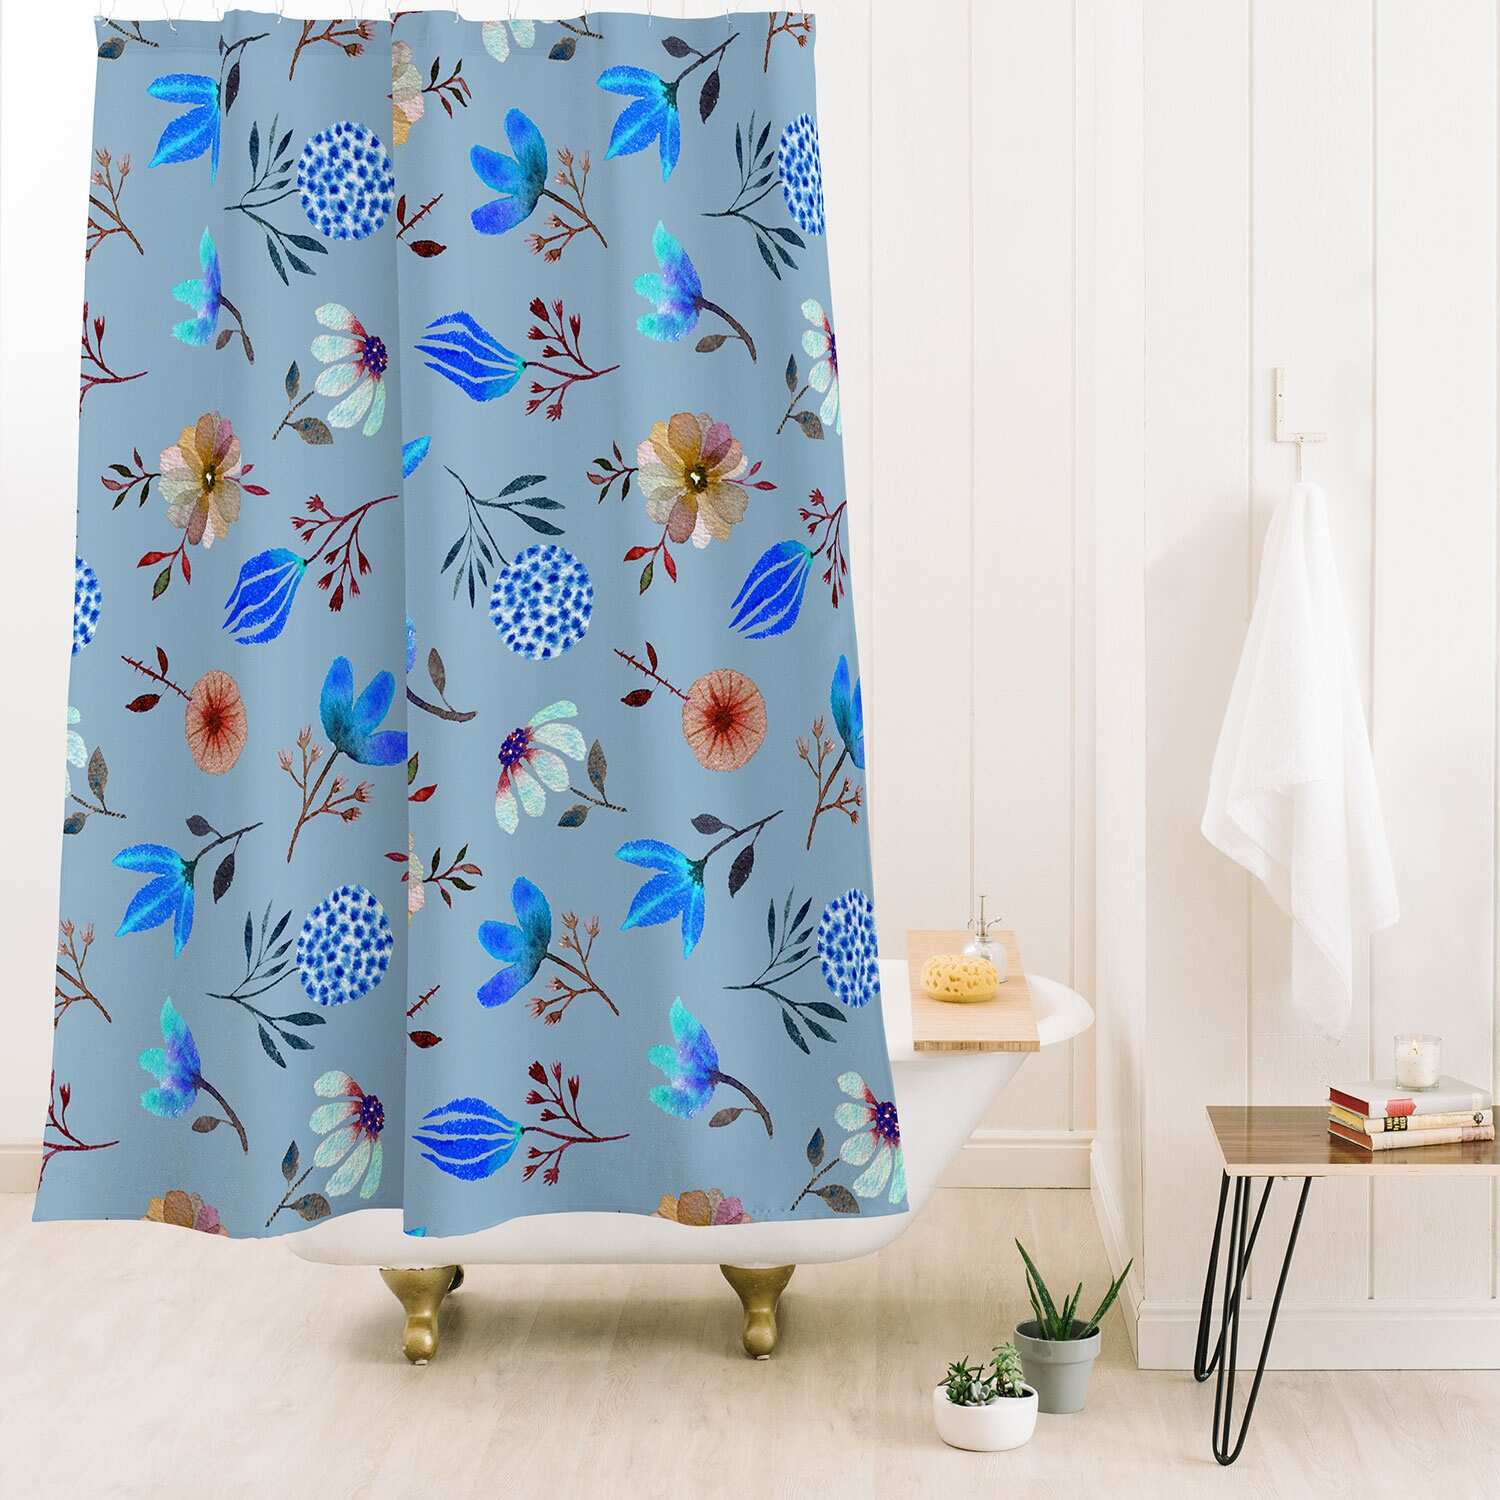 Julia Madoka Loose Watercolor Florals Smoky Made to Order Shower Curtain 71" x 74" with Liner - 71" x 74"